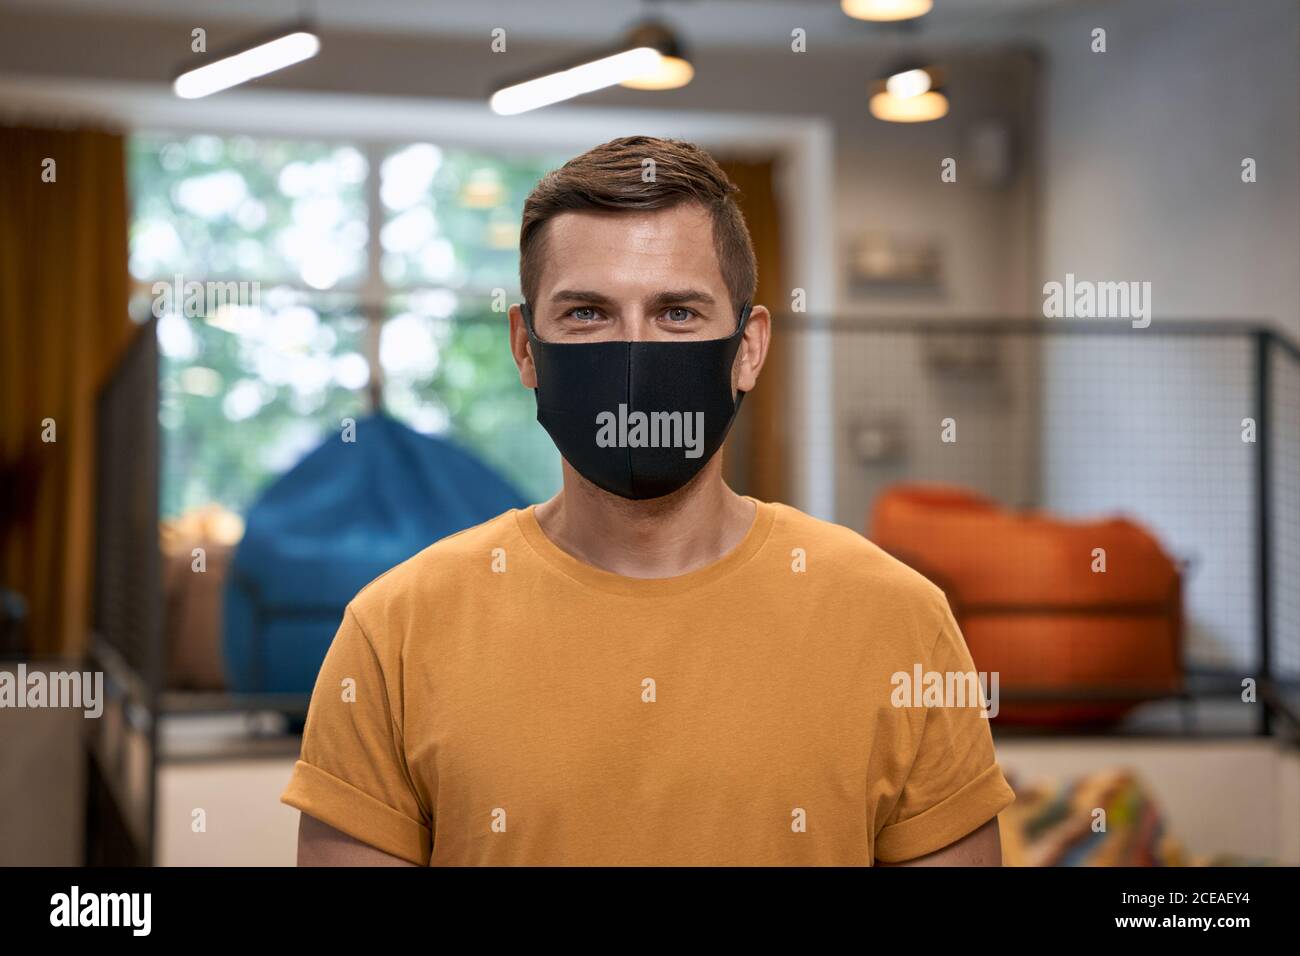 Working safely during coronavirus. Portrait of young man, male office worker wearing black protective mask and looking at camera, standing in the Stock Photo